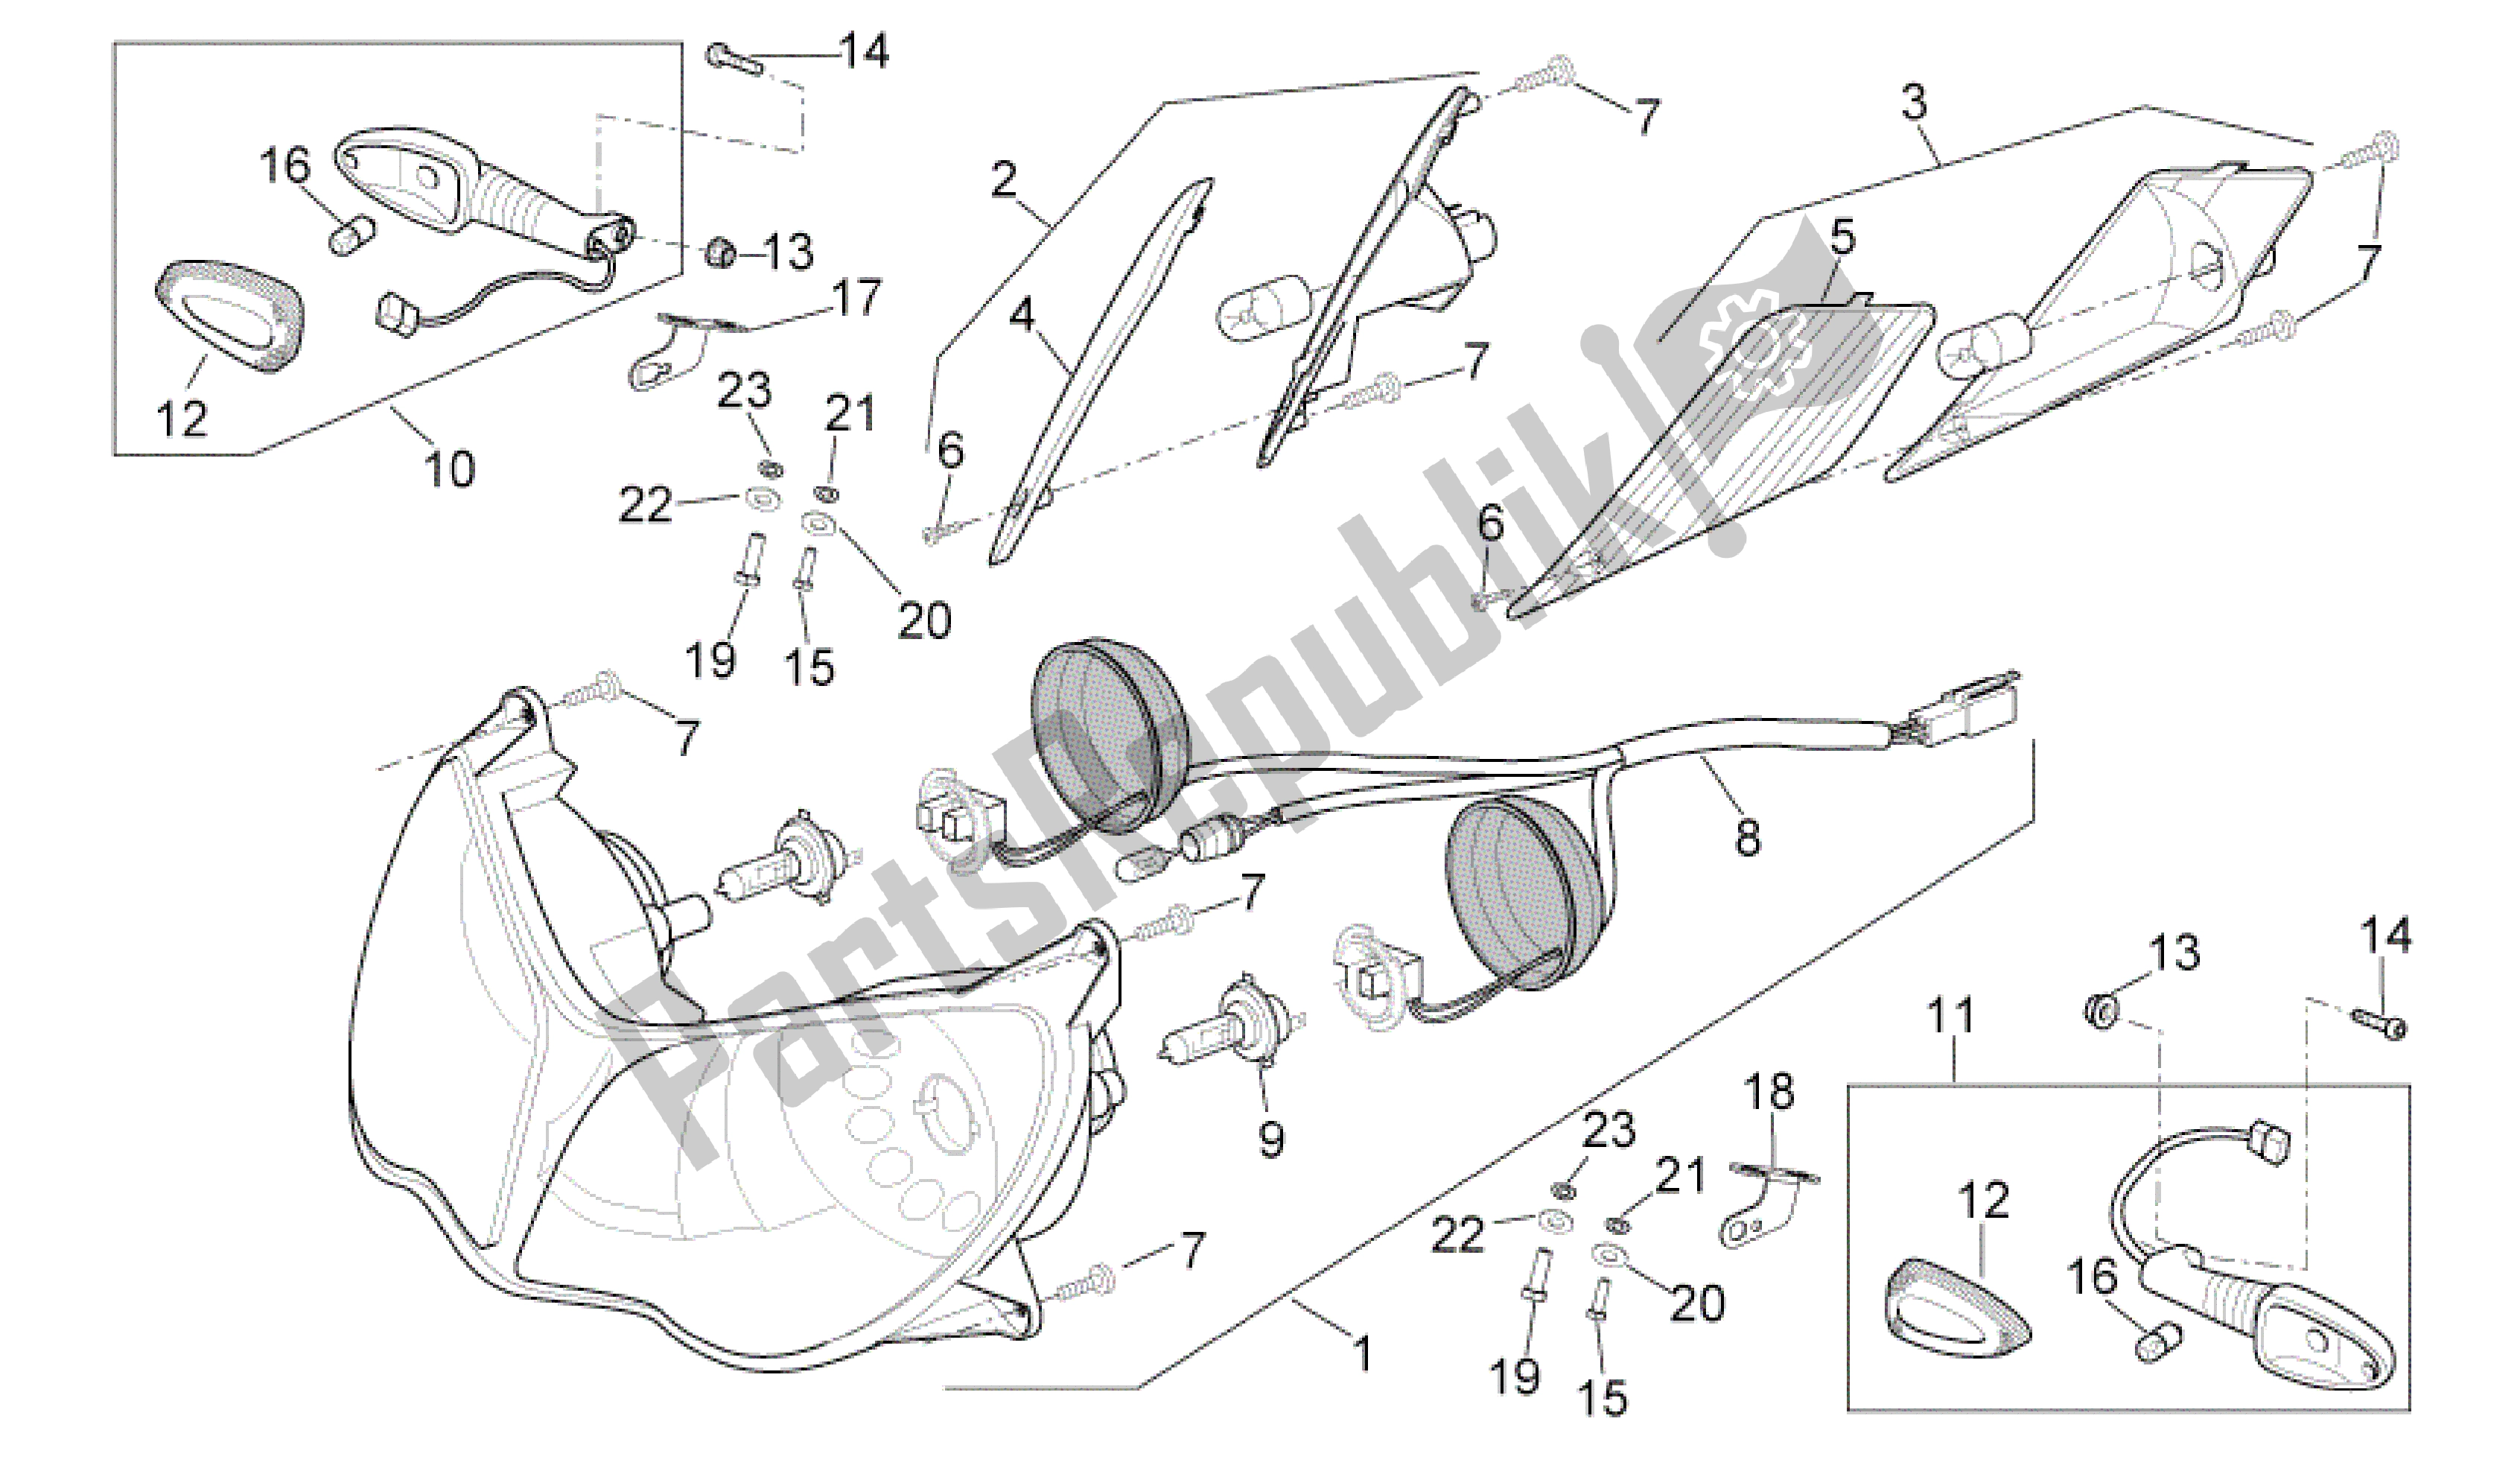 All parts for the Headlight of the Aprilia Sport City 300 2008 - 2010